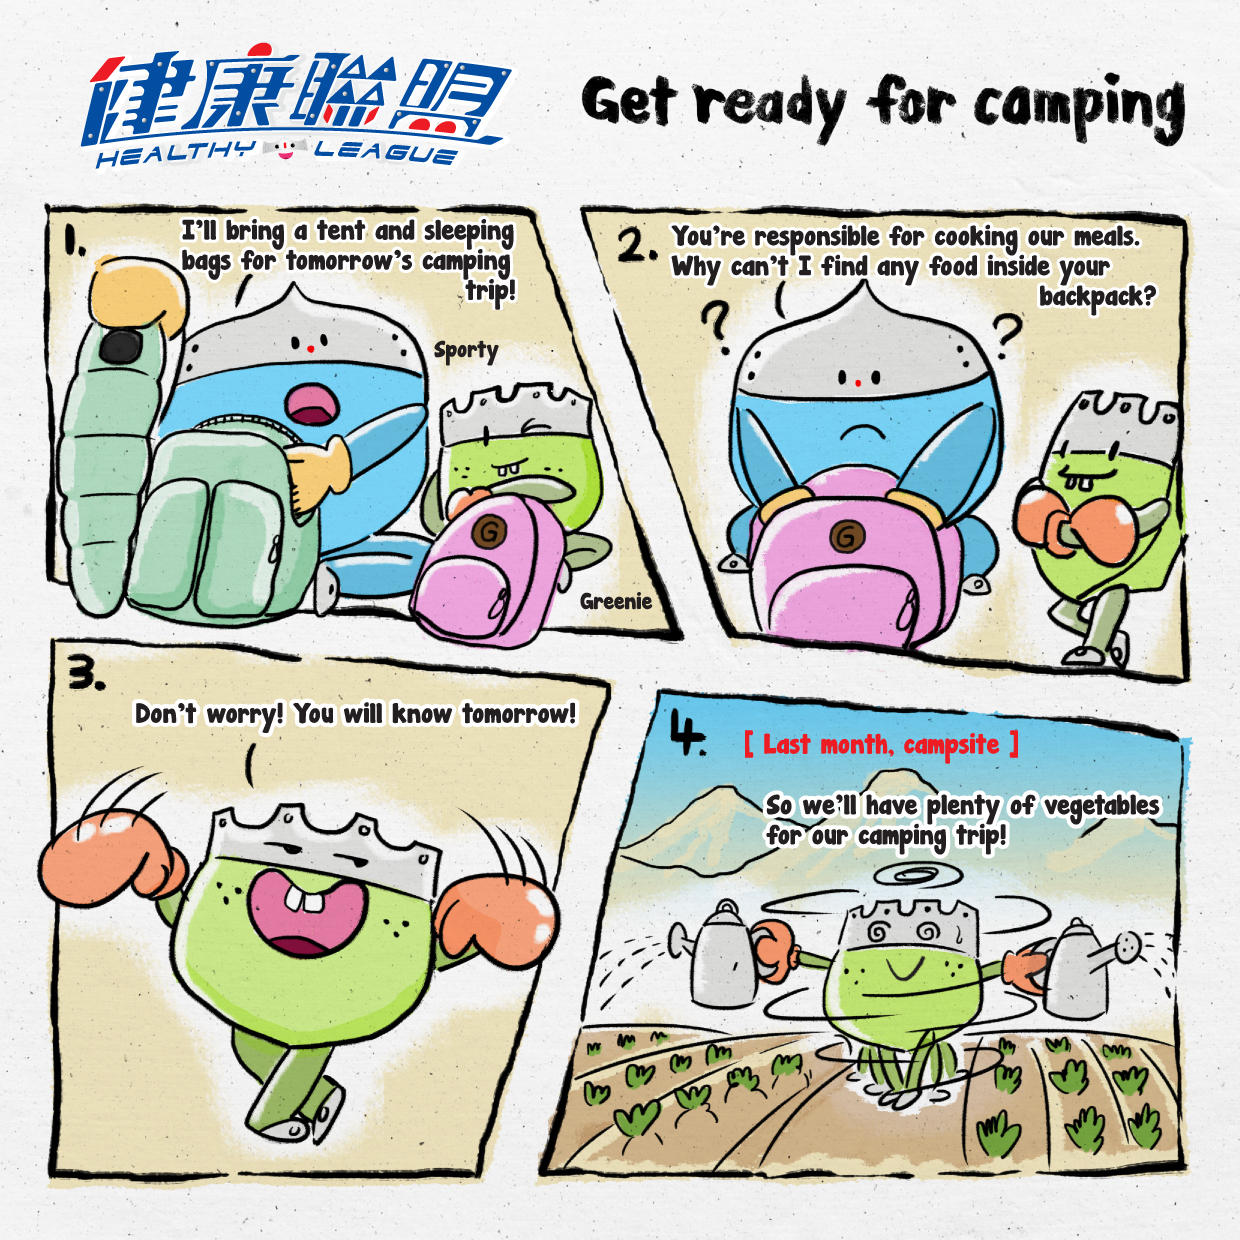 GET READY FOR CAMPING